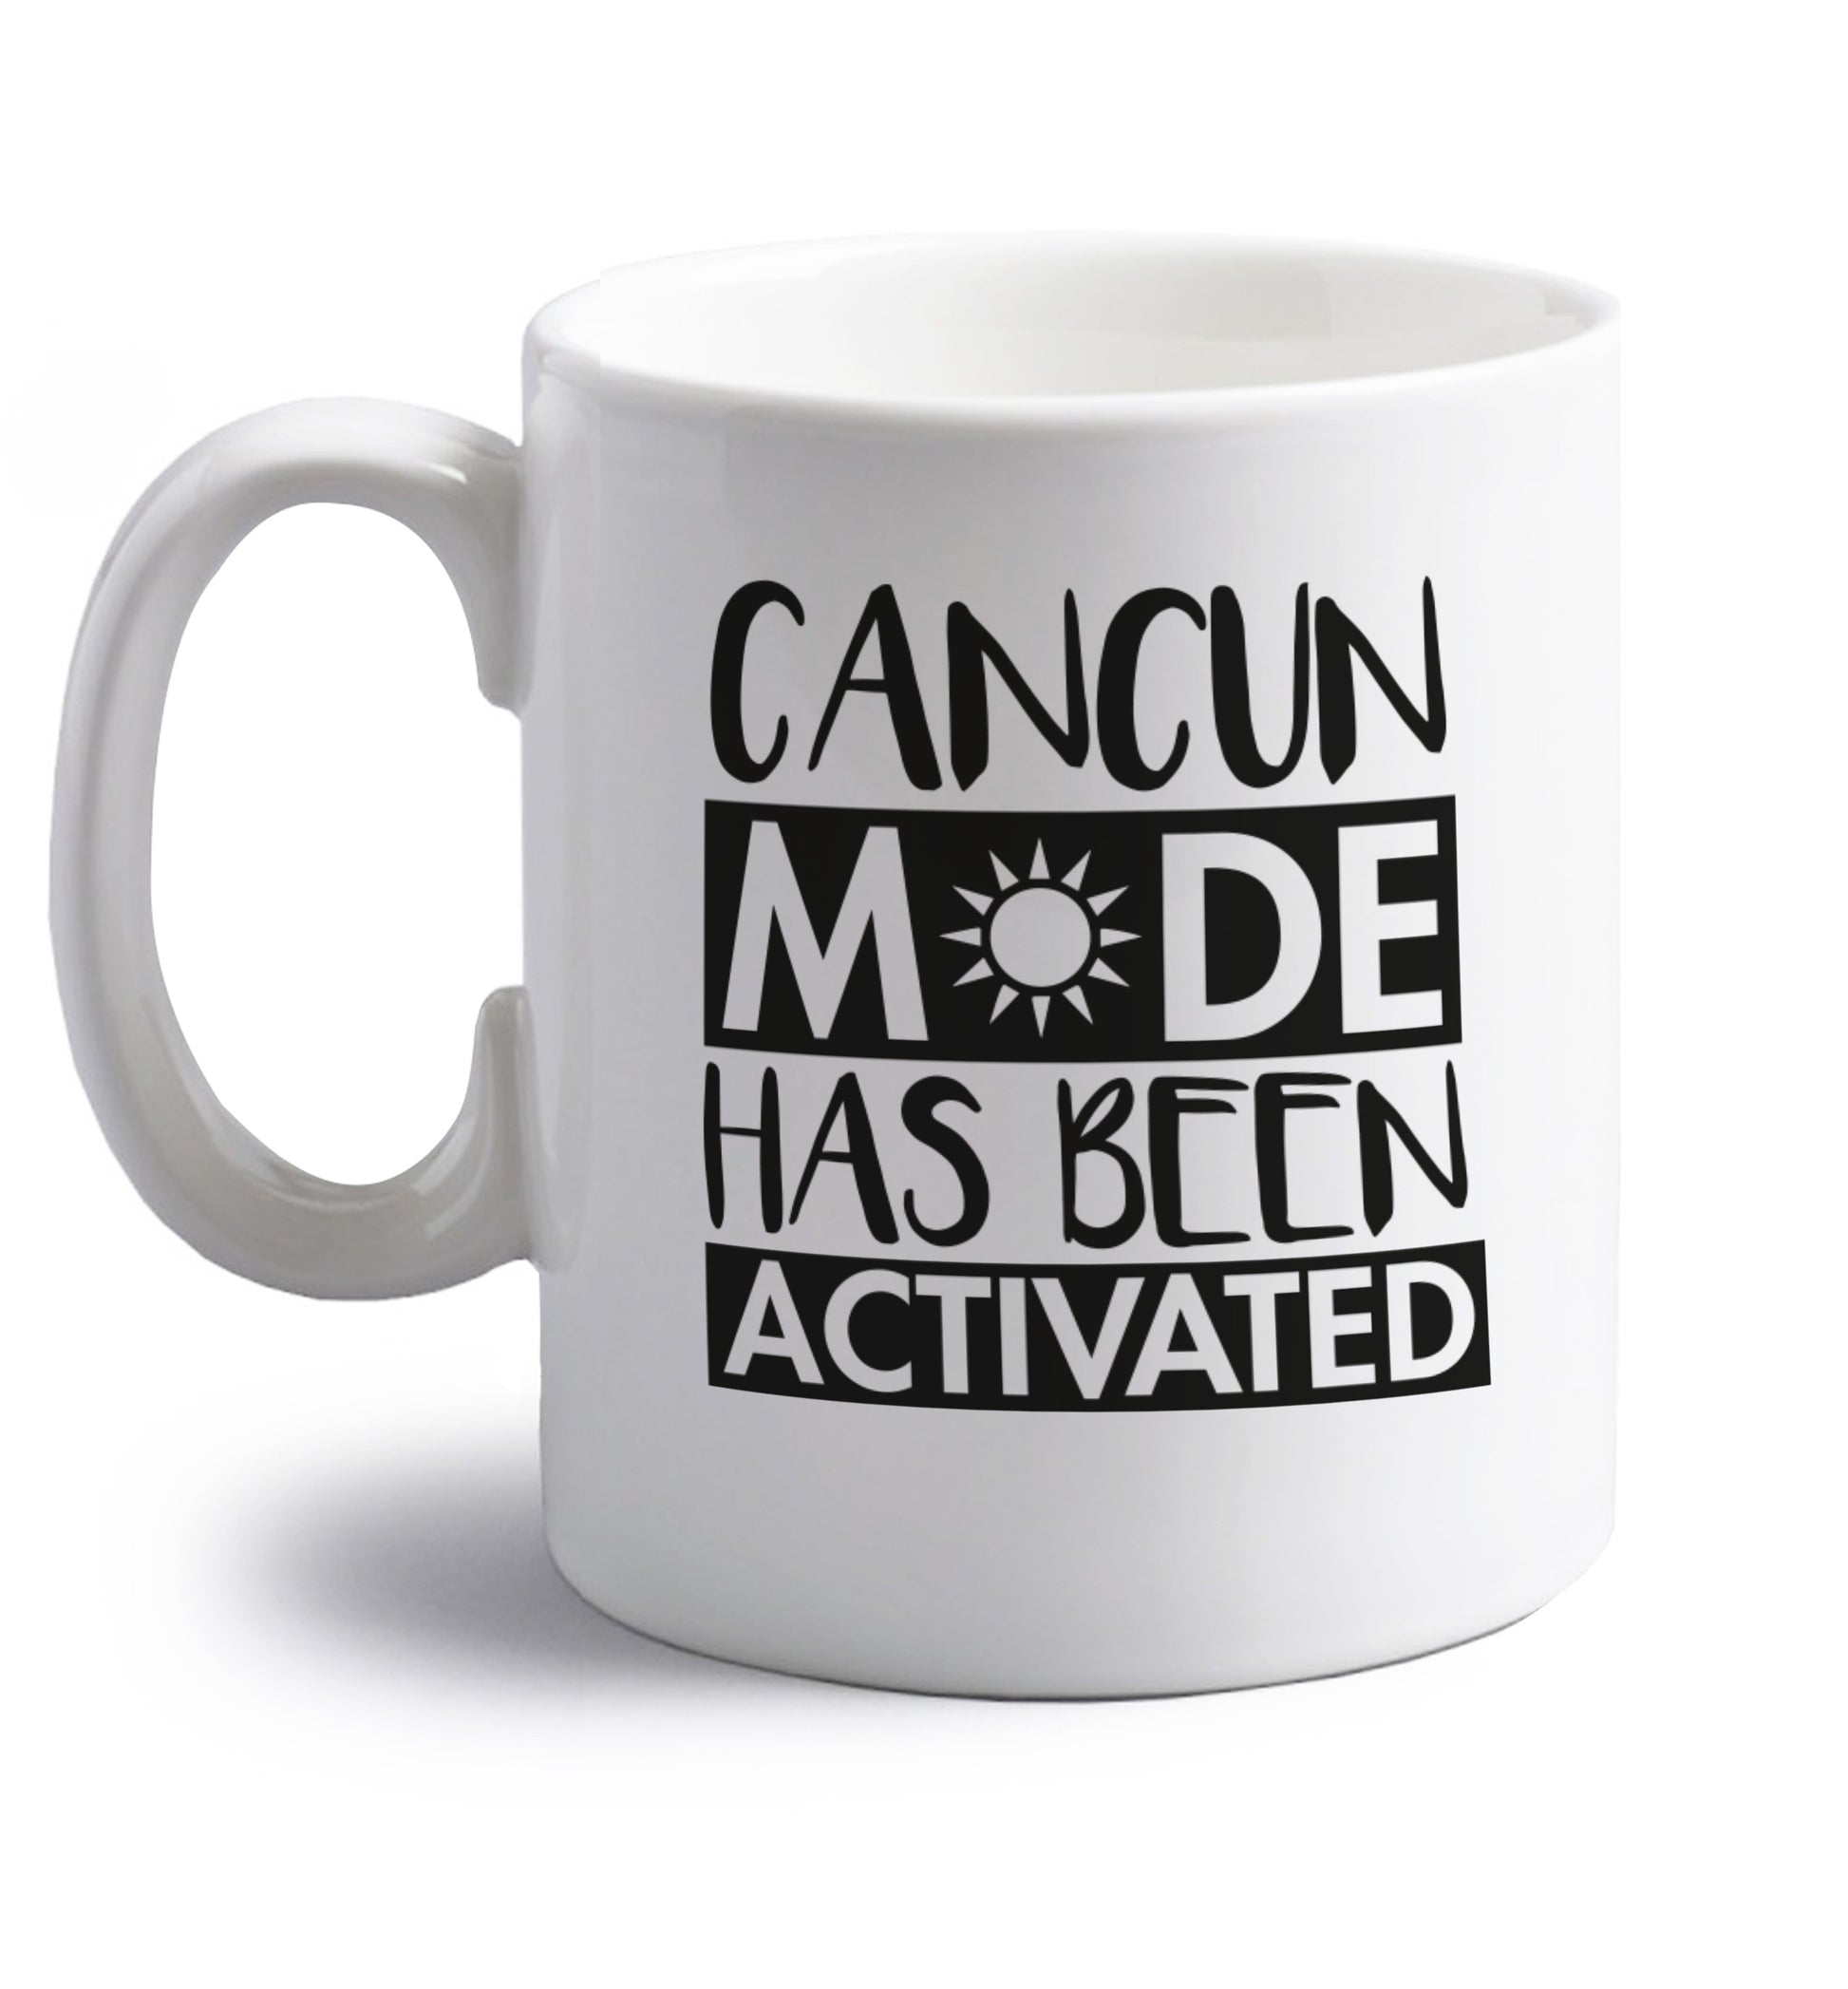 Cancun mode has been activated right handed white ceramic mug 